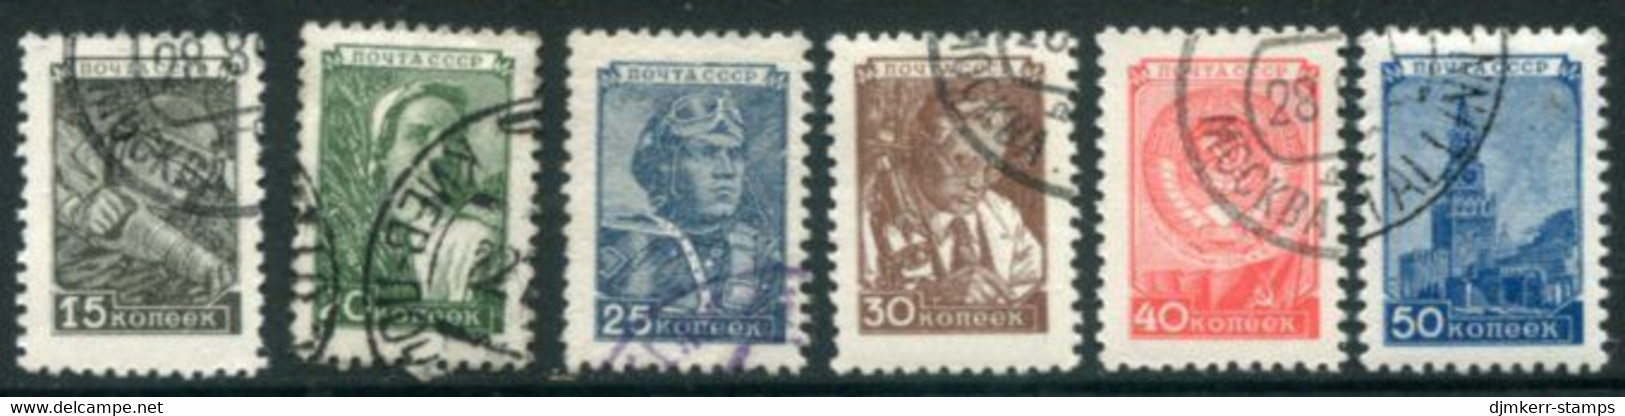 SOVIET UNION 1949 Definitive (cheapest Types) Used.  Michel 1331-36 I - Used Stamps